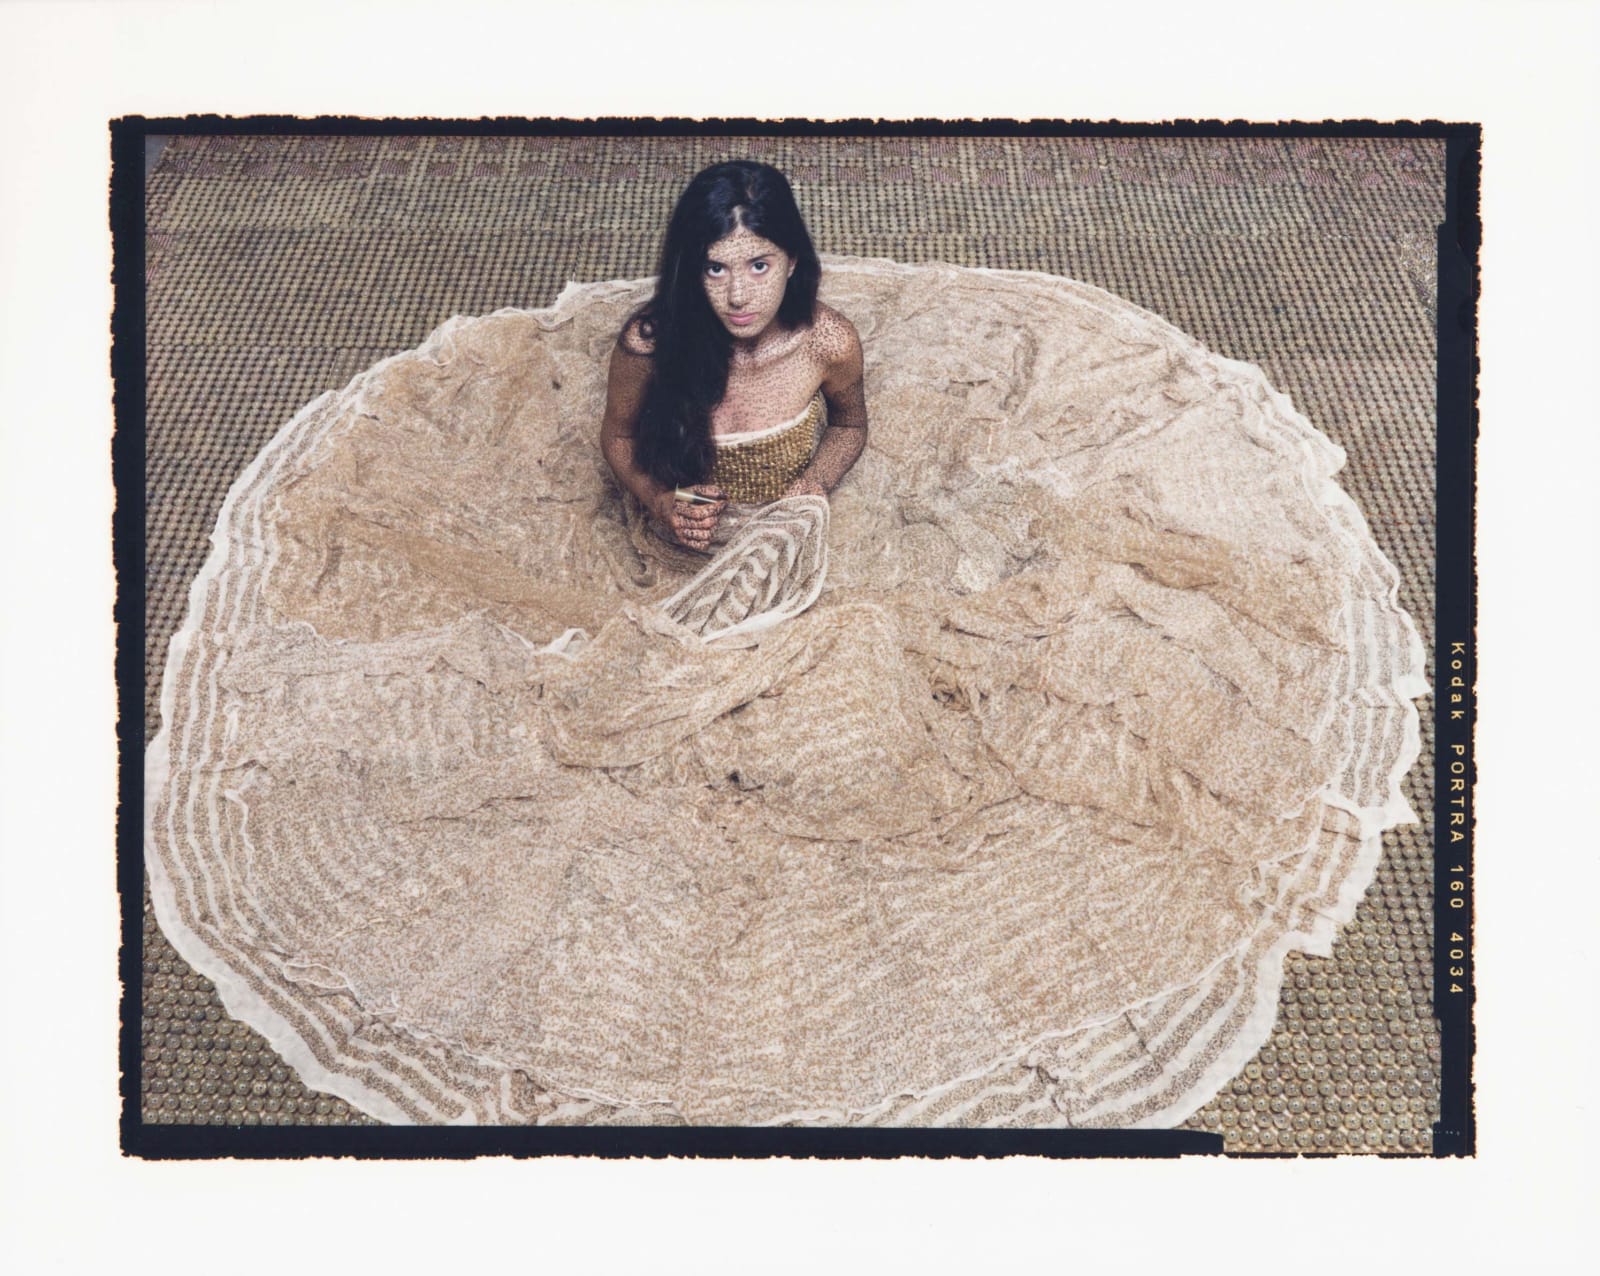 Woman sitting on floor with dress in circle around her, holding henna in hand, by Lalla Essaydi